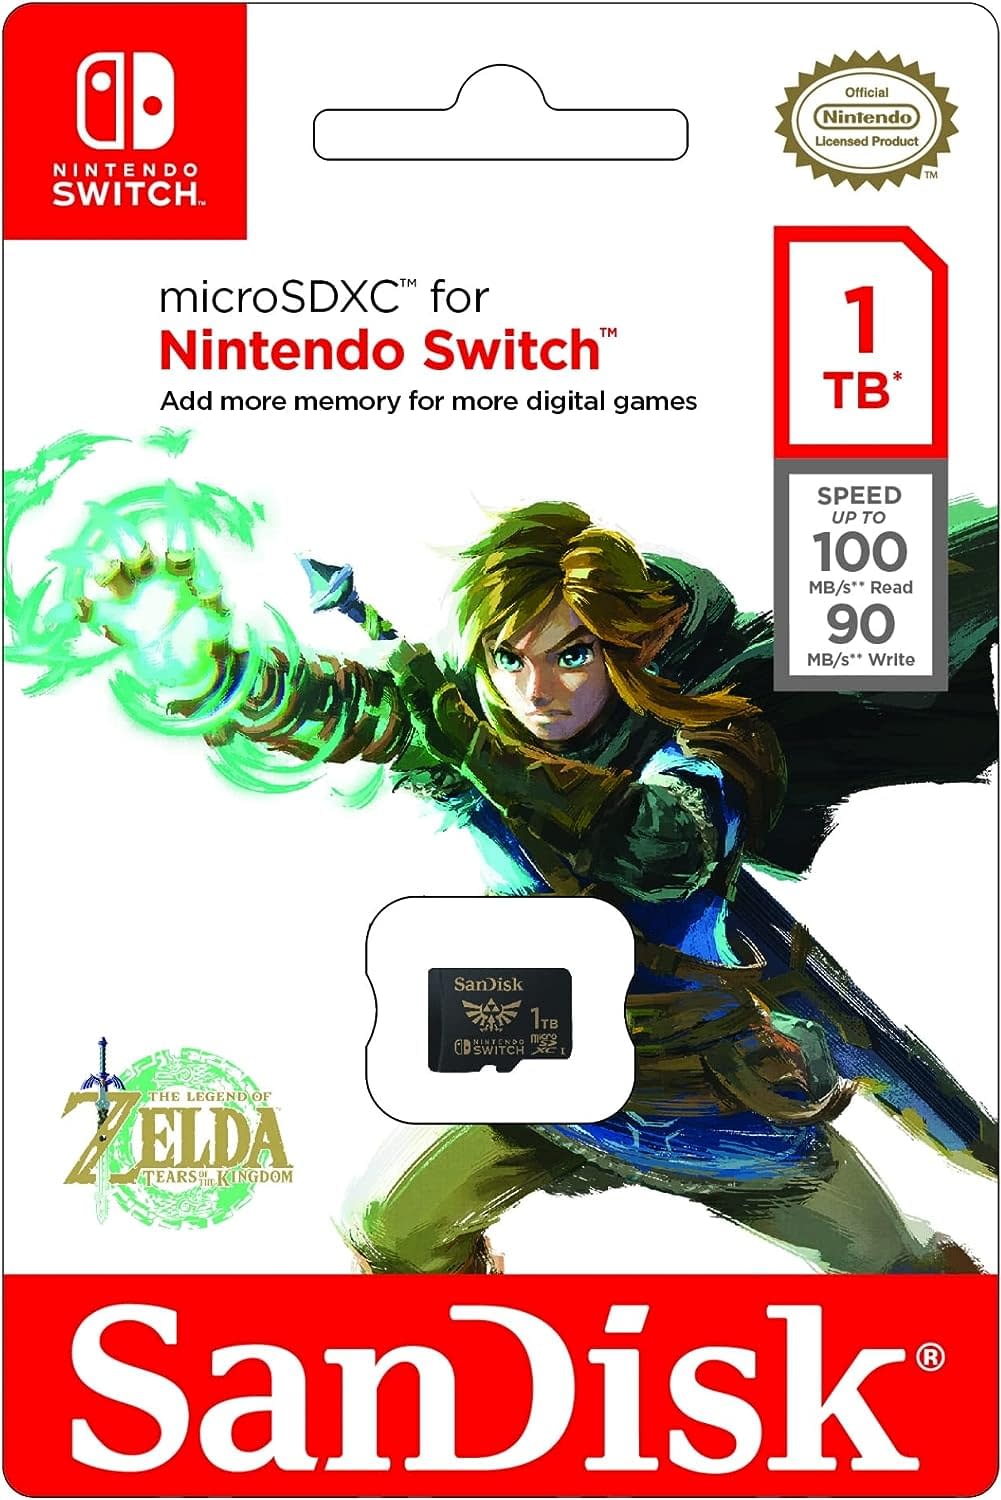 New Zelda and Yoshi microSD cards now available